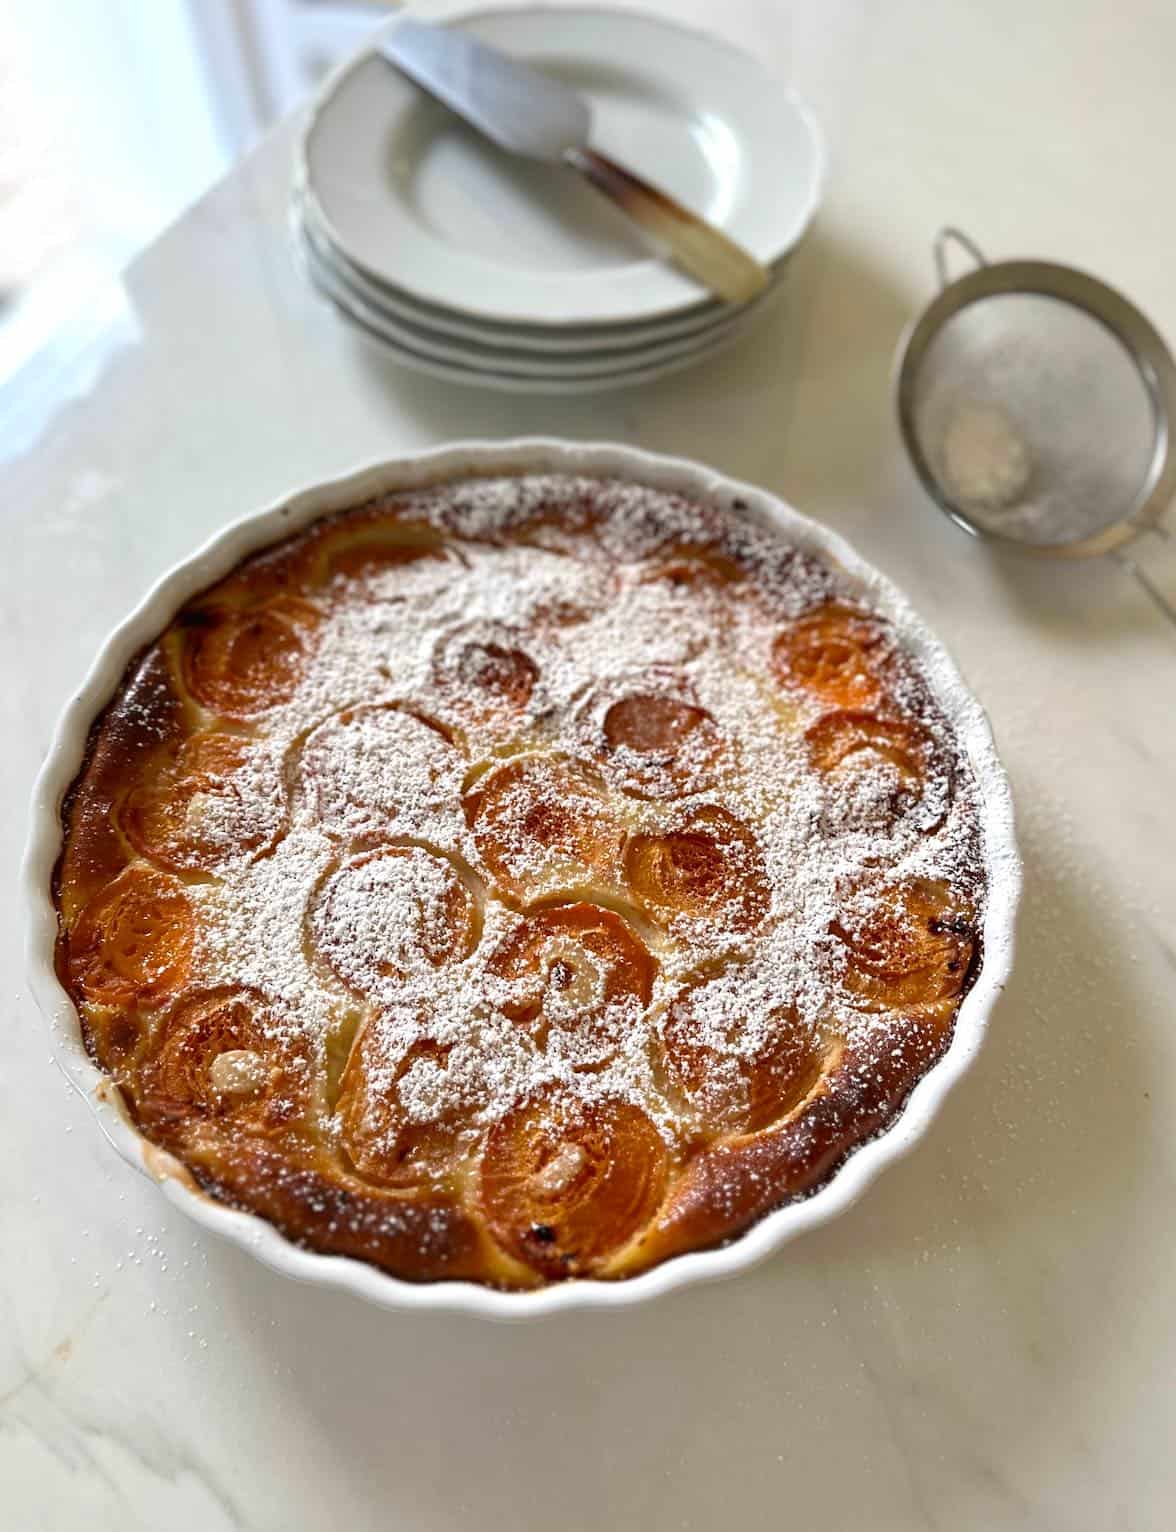 Apricot Clafoutis baked in a white quiche dish with powdered sugar